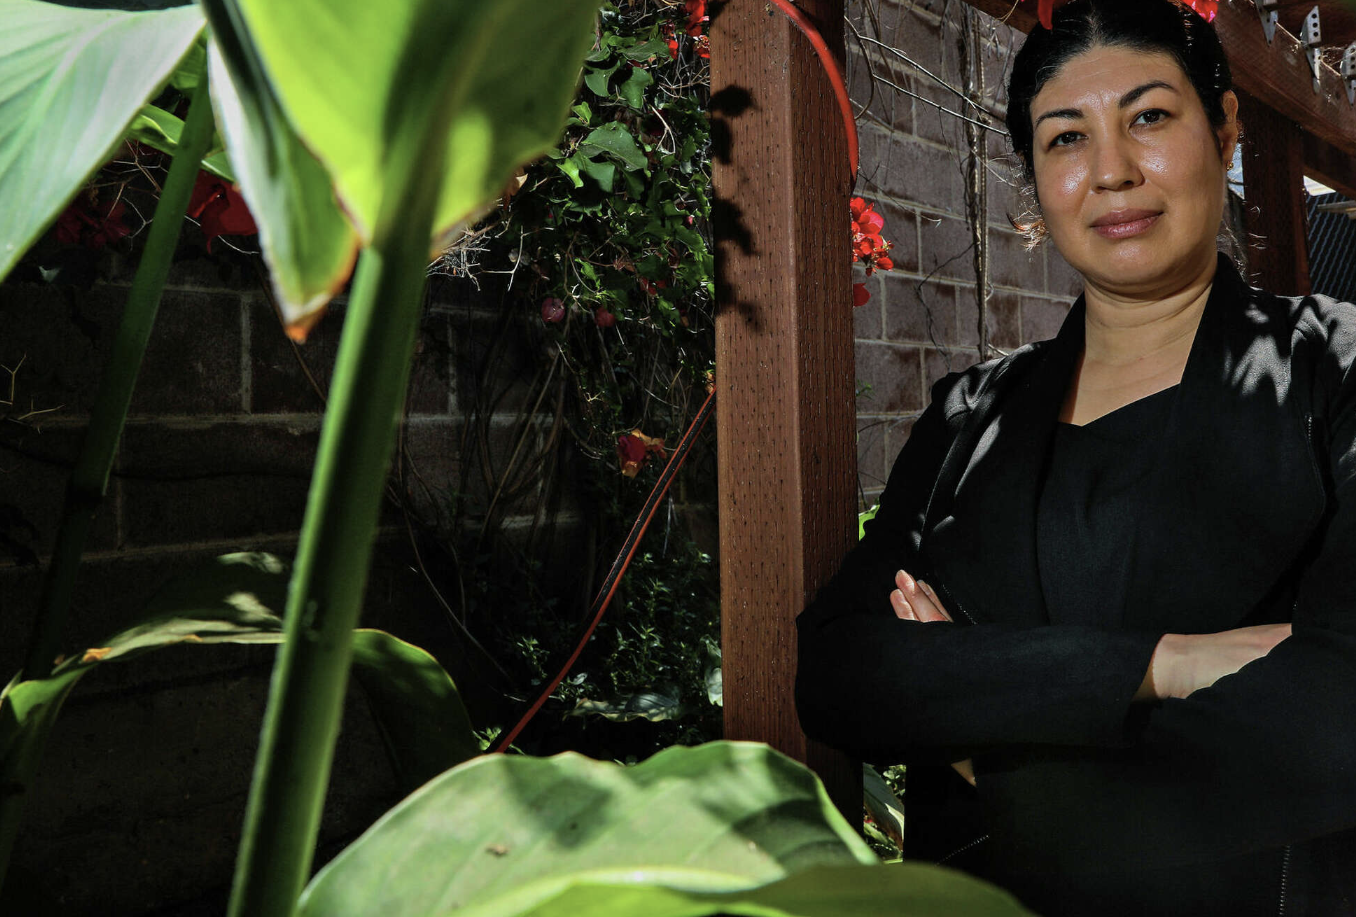 Dr. Yohualli B. Anaya in the SF Chronicle: “Latina Doctors are a Troubling Rarity, Study Finds”